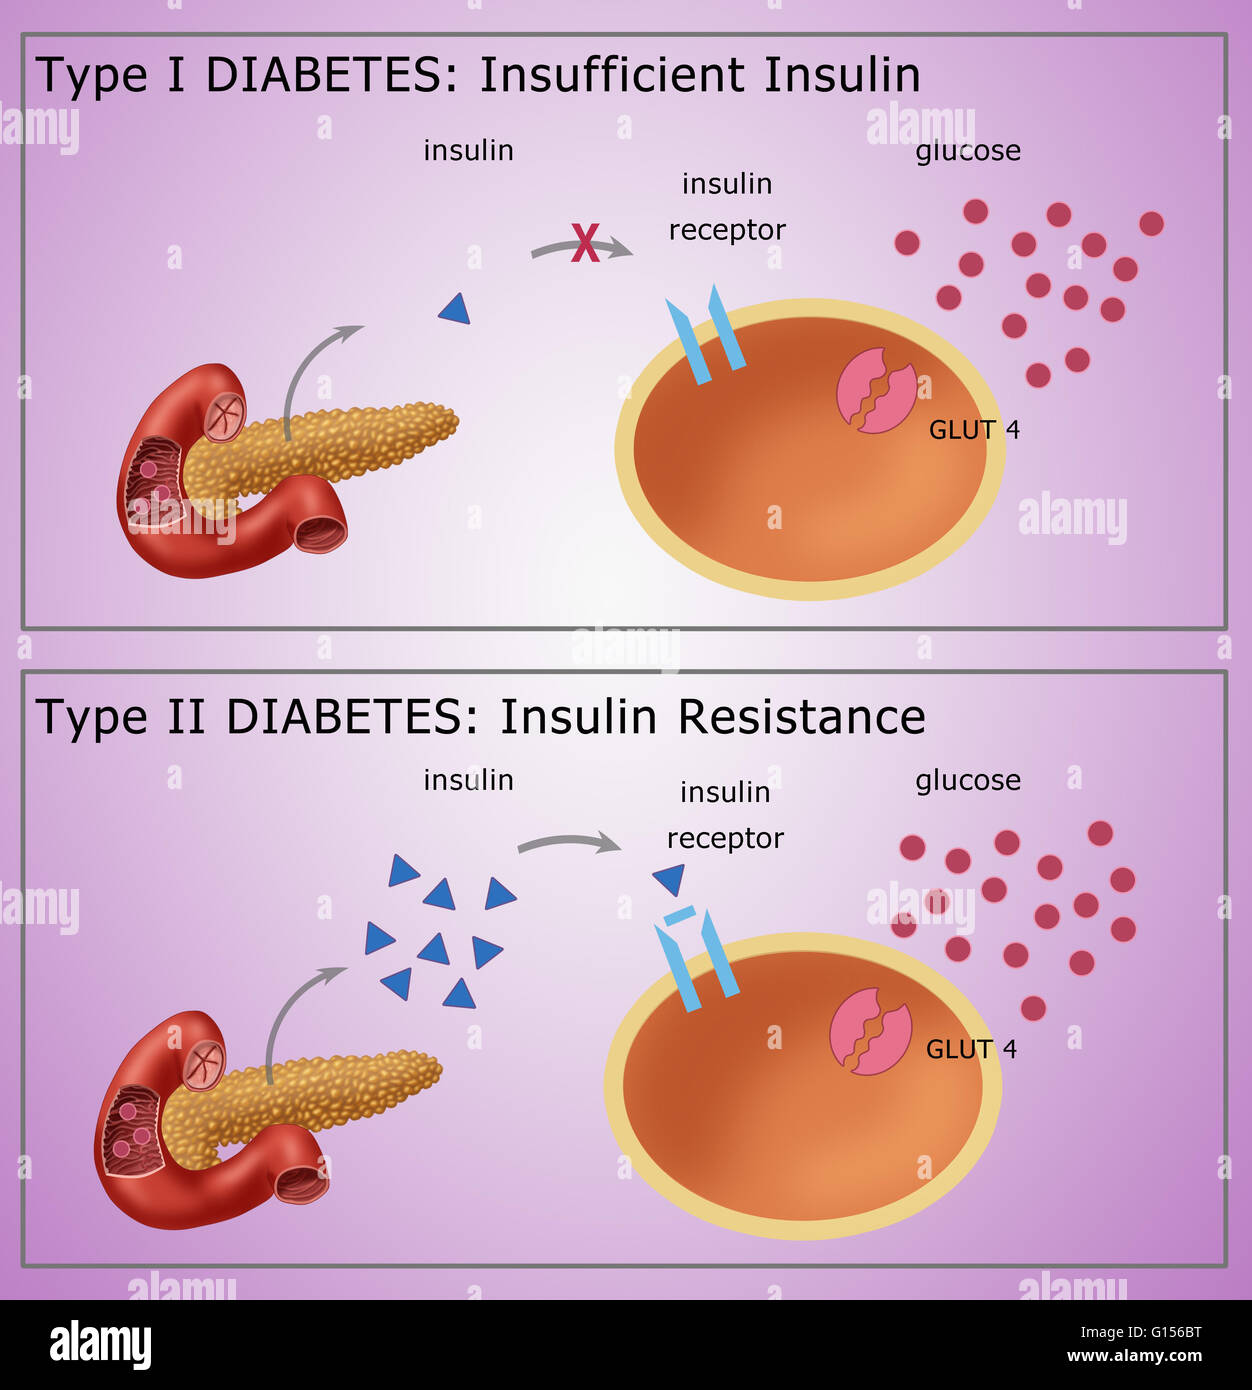 Illustration comparing Type I Diabetes (top) where the body fails to  produce sufficient insulin and Type II Diabetes (bottom) where the body  resists insulin. Depicted in the diagram are: Insulin (blue triangles),